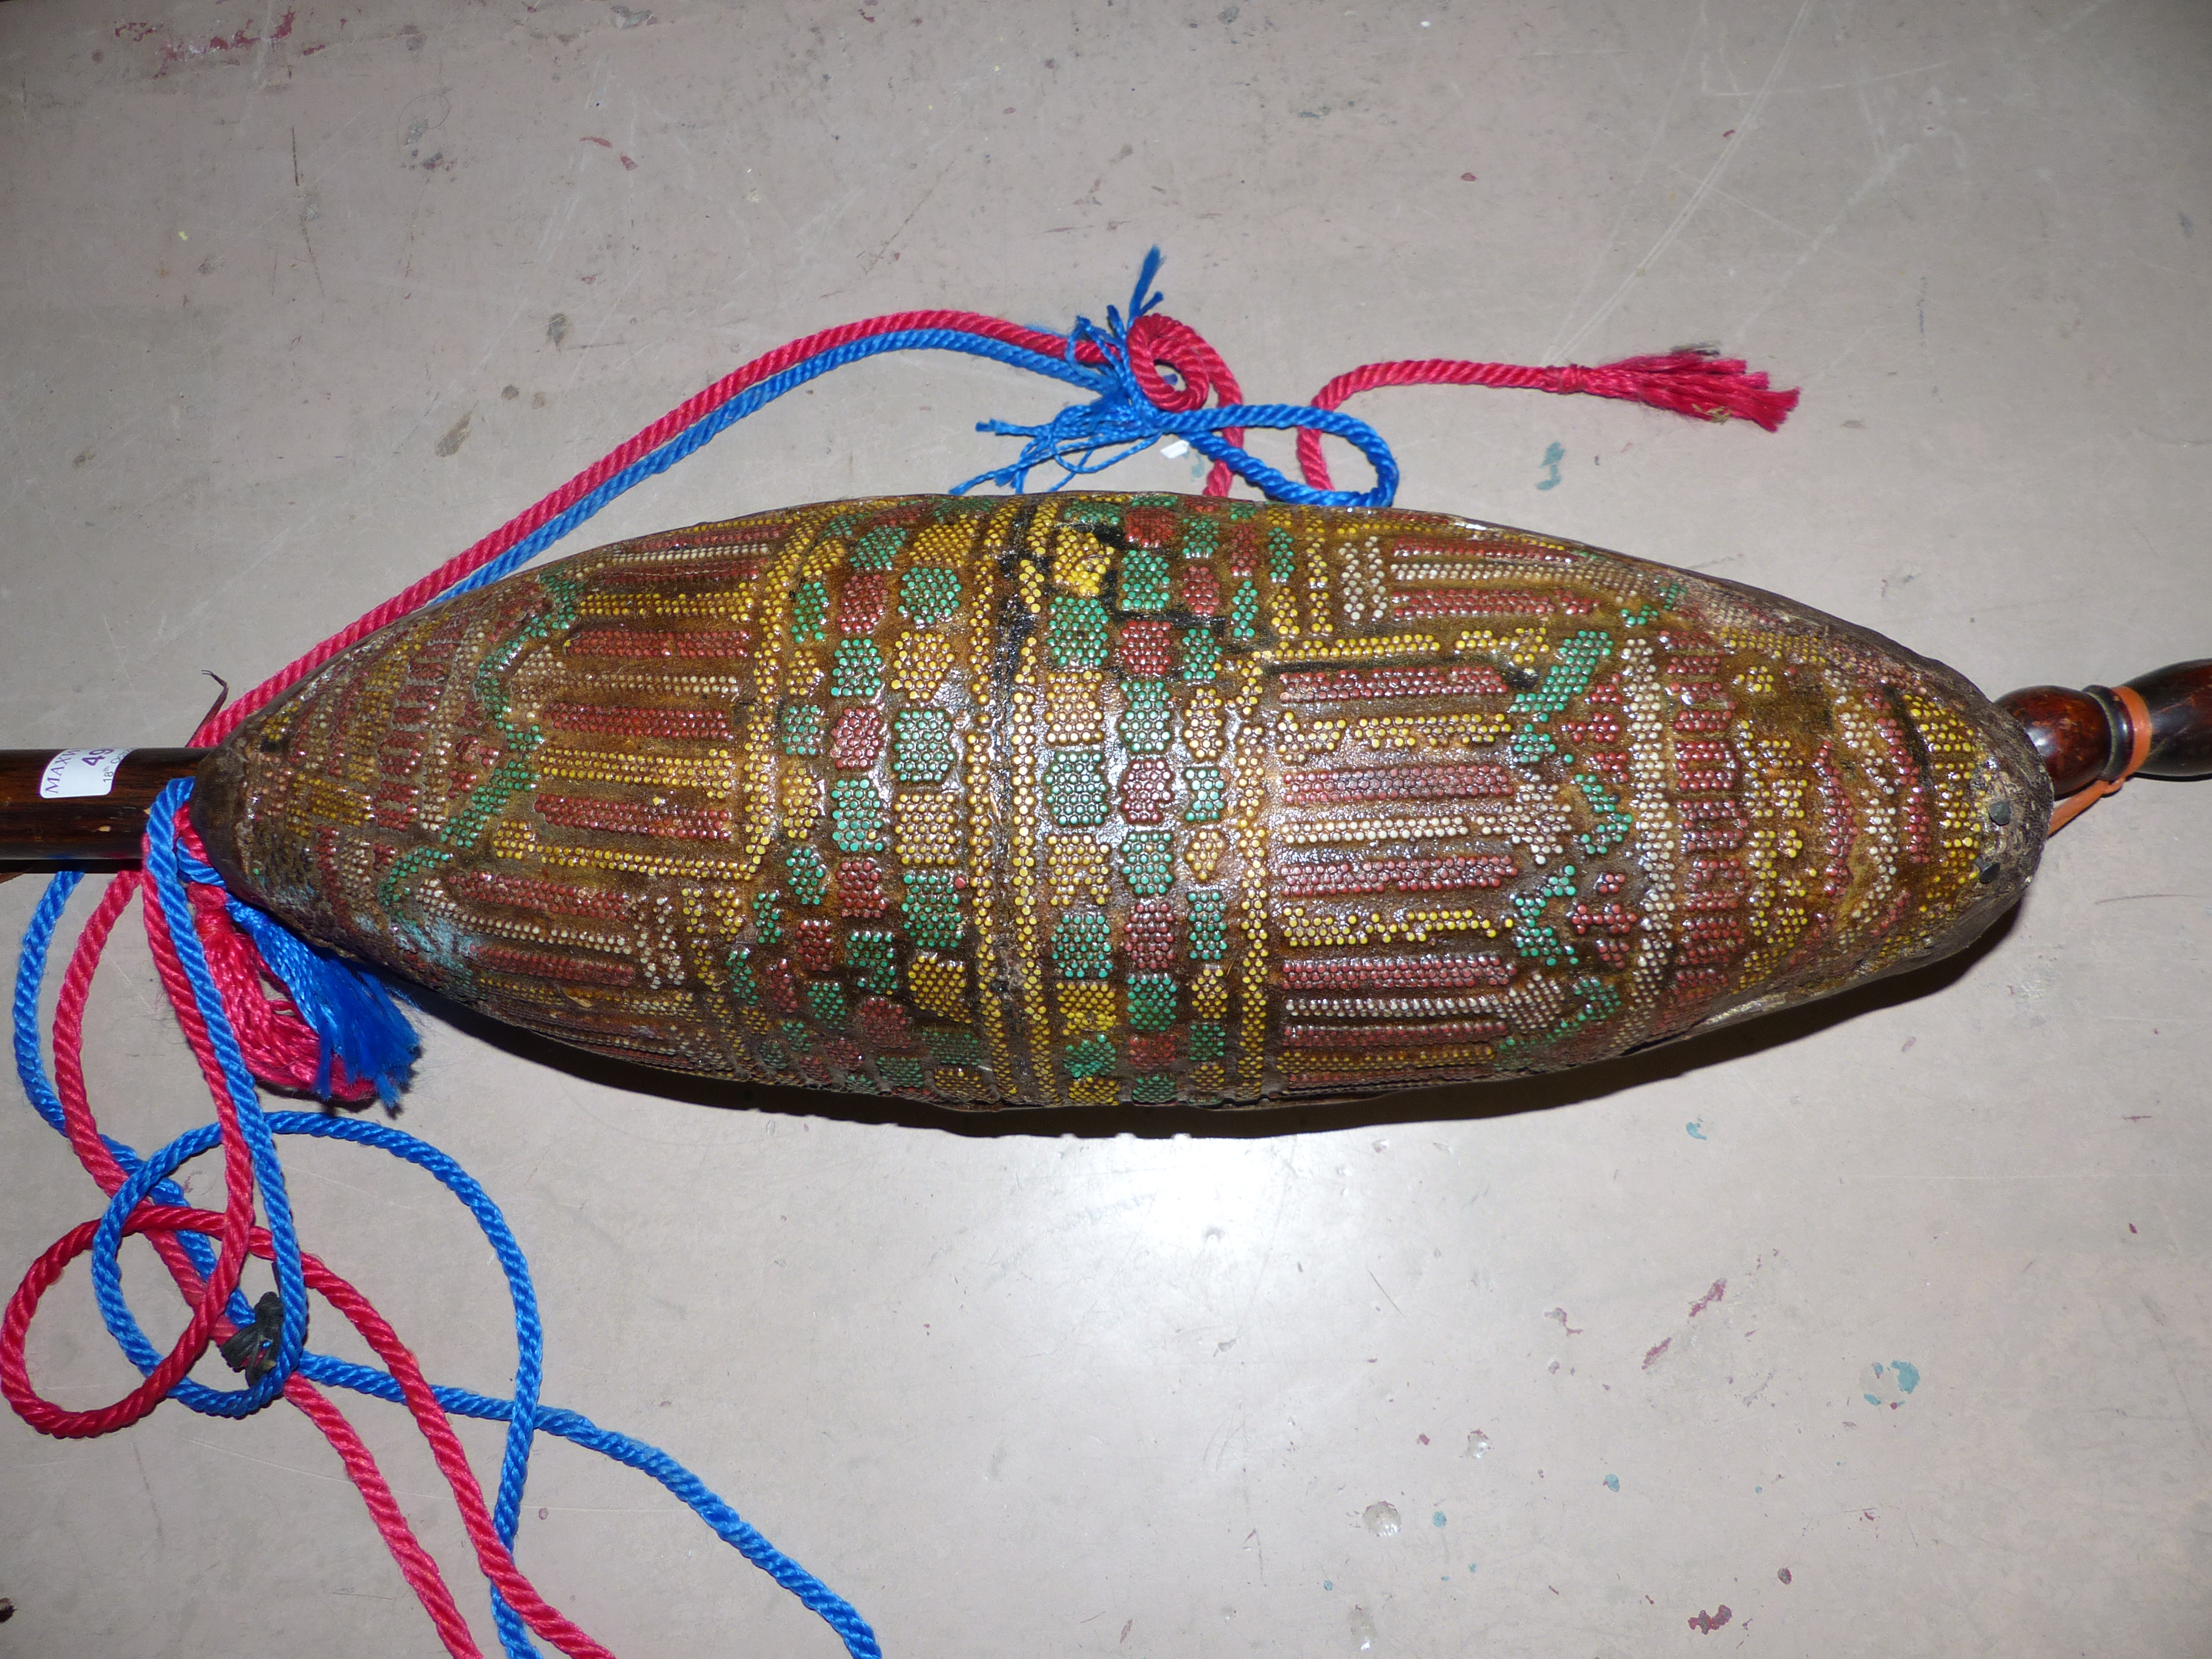 An unusual musical instrument with 3 strings and beaded decoration to the body and vellum cover